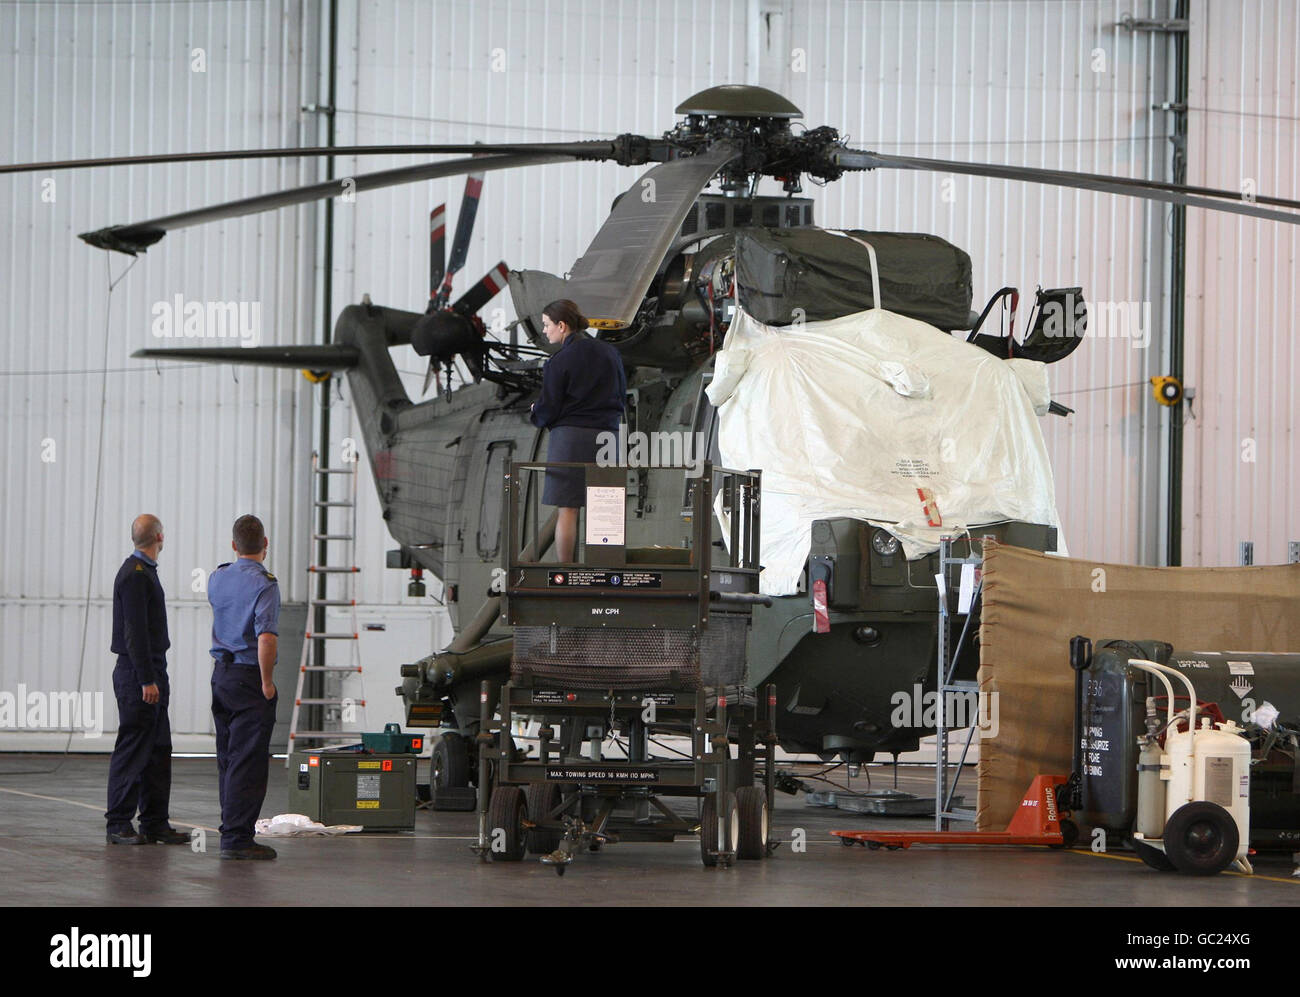 A Puma helicopter in one of the hangers at RAF Aldergrove. The RAF are preparing to leave Aldergrove, its last remaining permanent base in Northern Ireland. Stock Photo